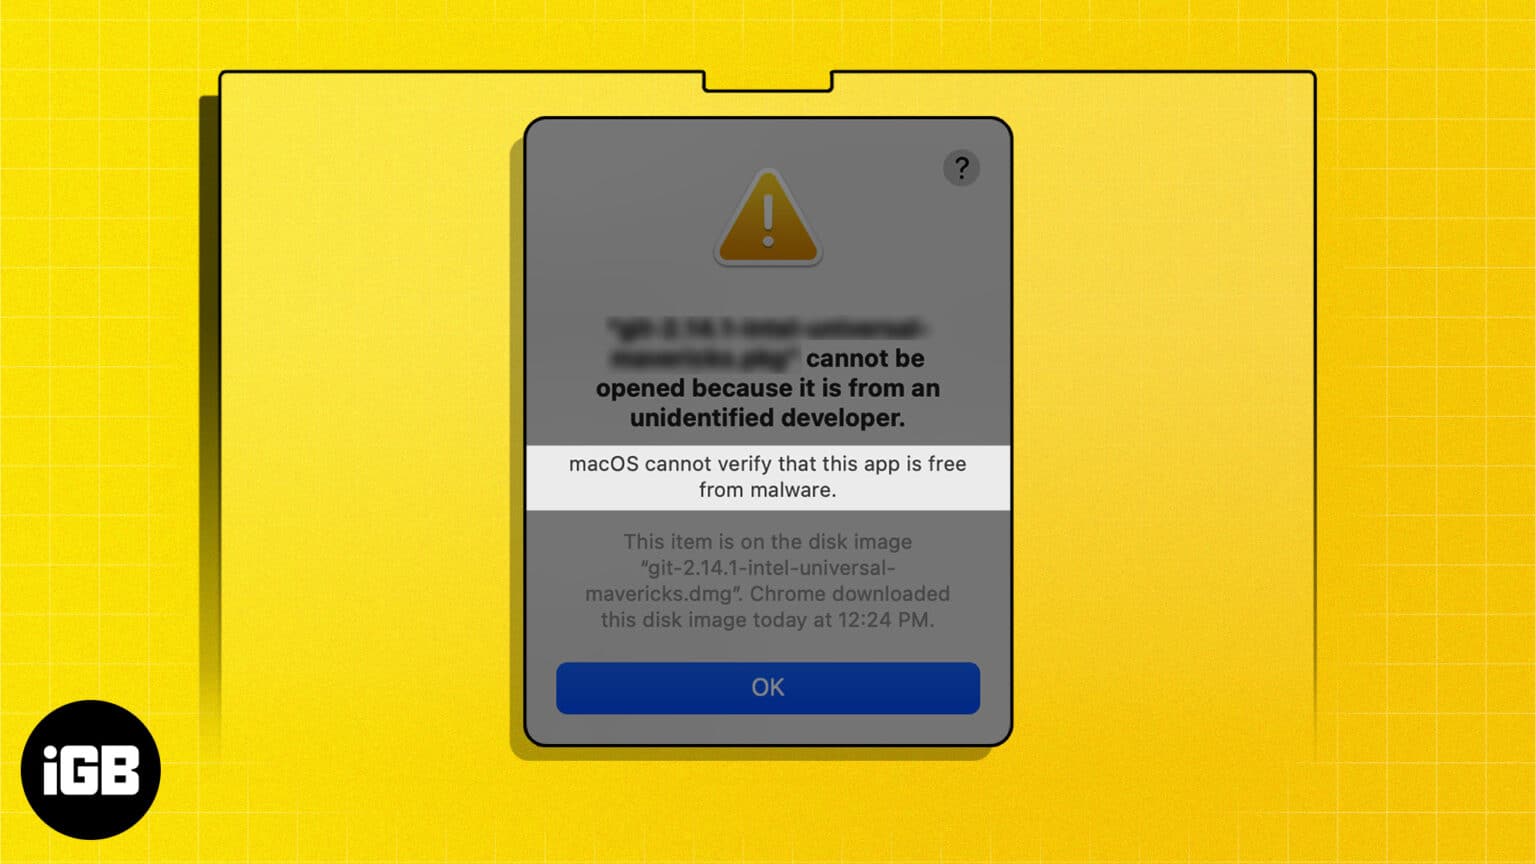 How to fix the macOS cannot verify that this app is free from malware issue